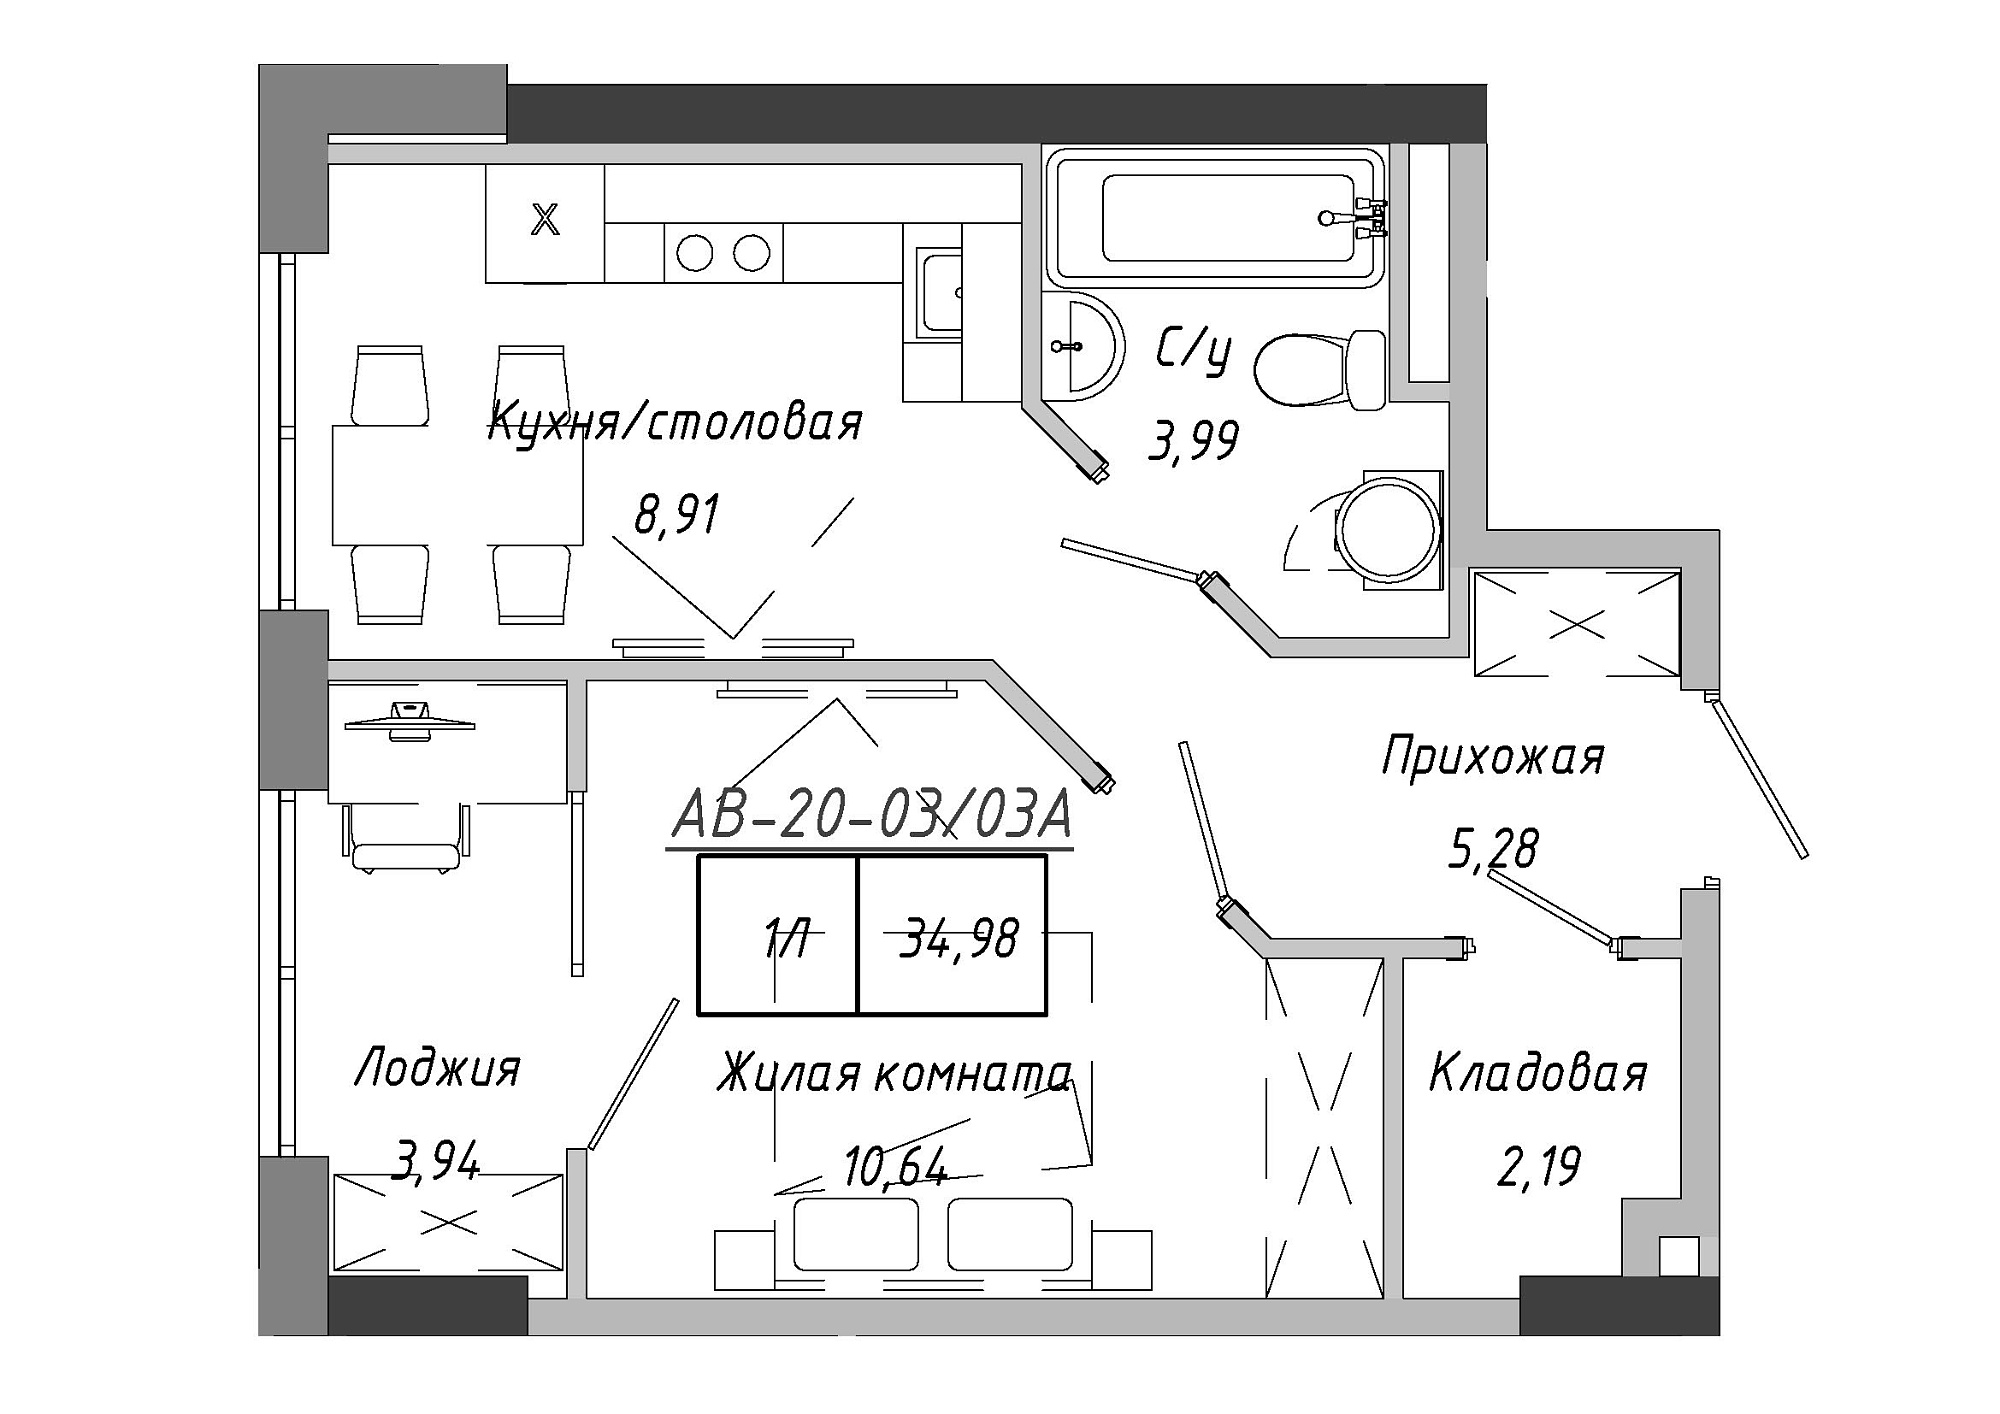 Planning 1-rm flats area 34.98m2, AB-20-03/0003а.